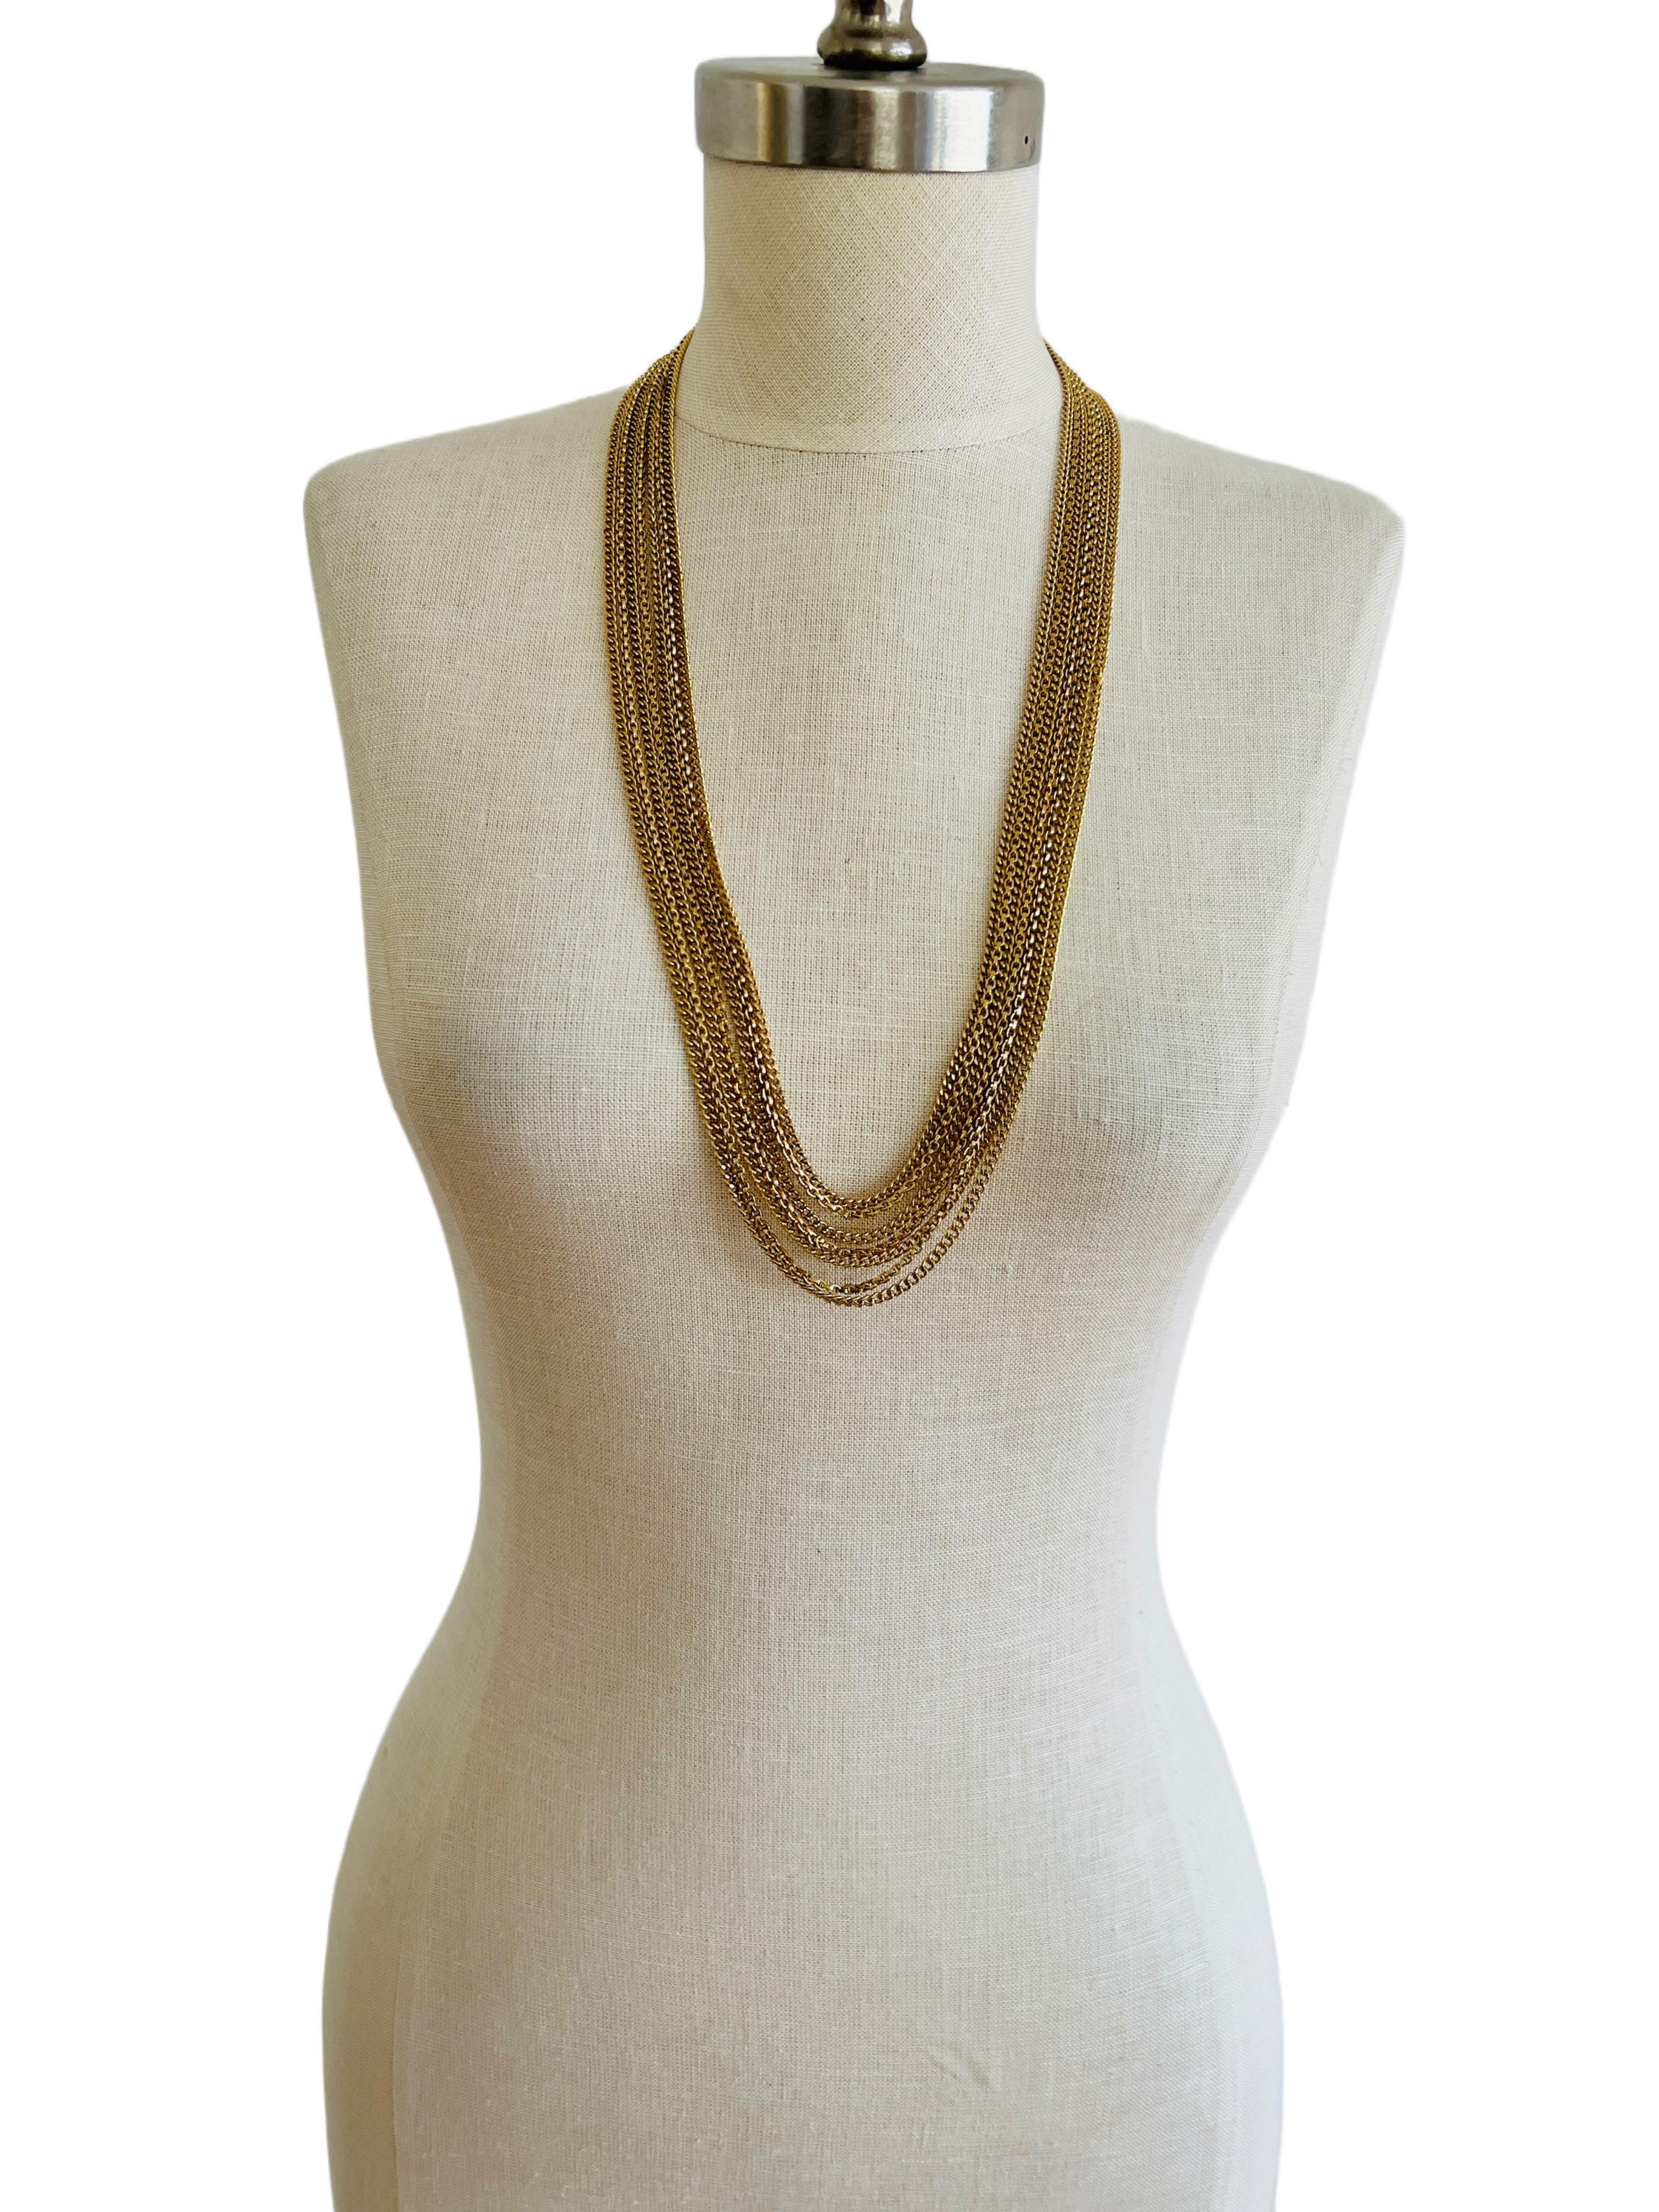 This fabulous necklace by Crown Trifari features 7 strands of gold plated chains. It can be worn long or if you have a very small neck, you might even be able to wear it as a choker. If you want to be even more creative, you might try it as a belt! 